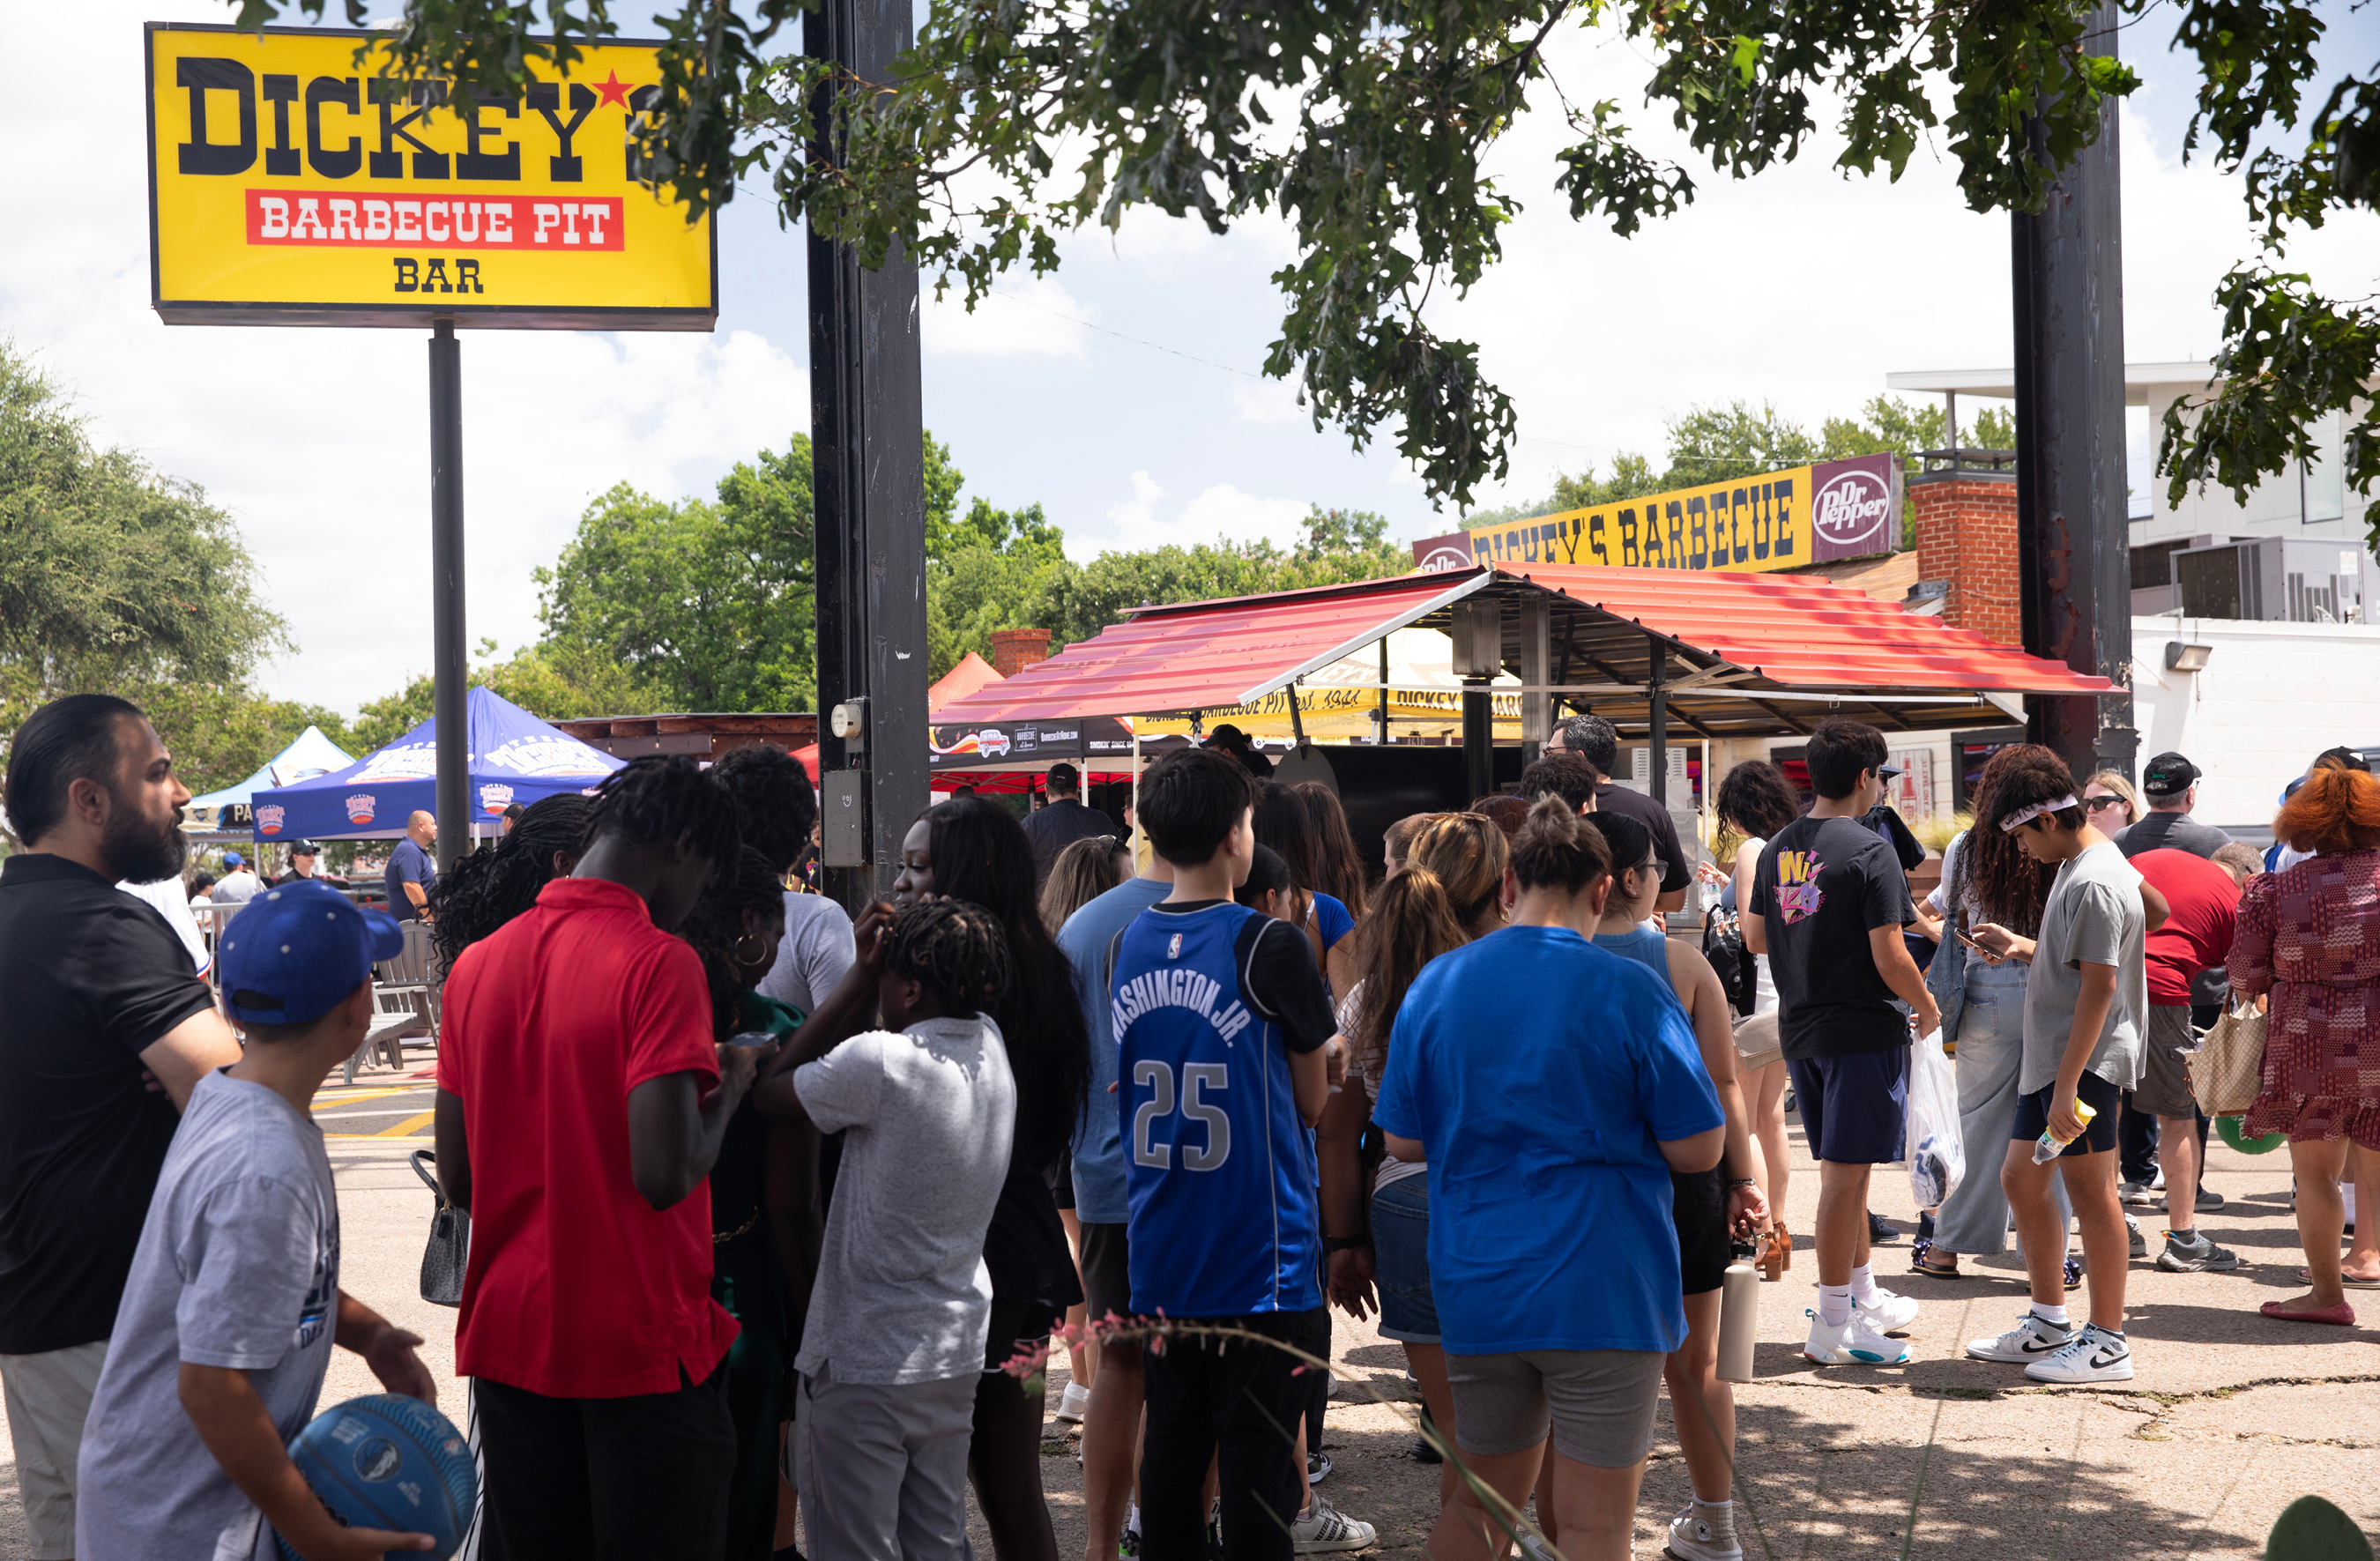 FANtastic Event with Dickey's Barbecue Pit and PJ Washington